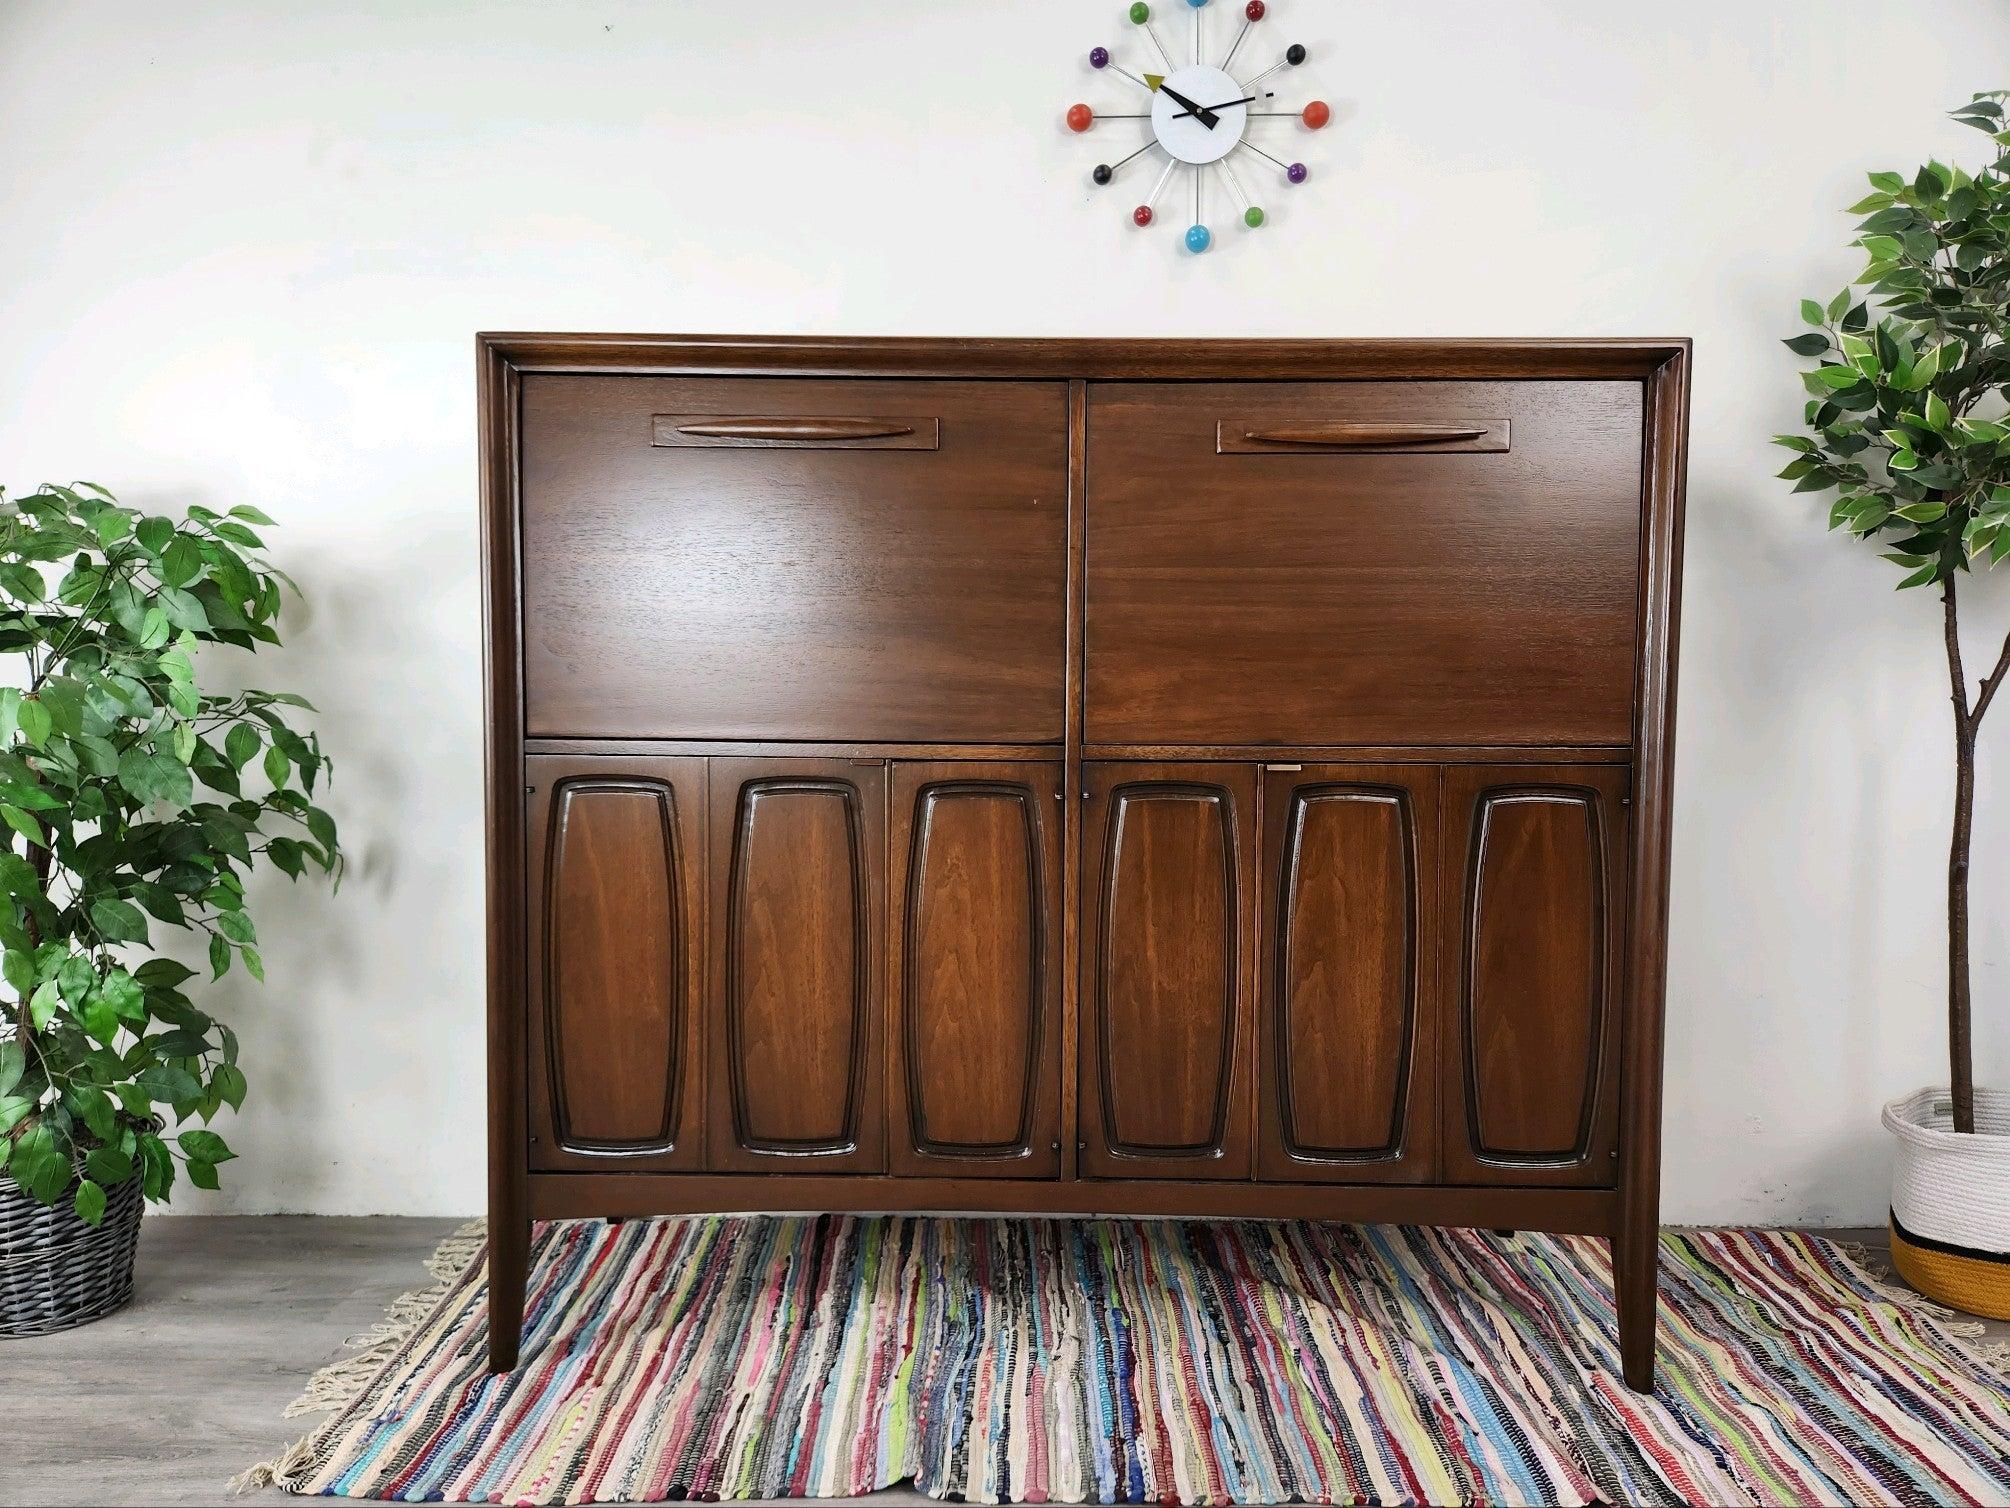 This Broyhill piece was purchased from the family of the original owner. It was called a Butlers Pantry in the catalog but it was used as a desk by the owner. It's the perfect size for a bar cabinet too so you have so many options. 
There are